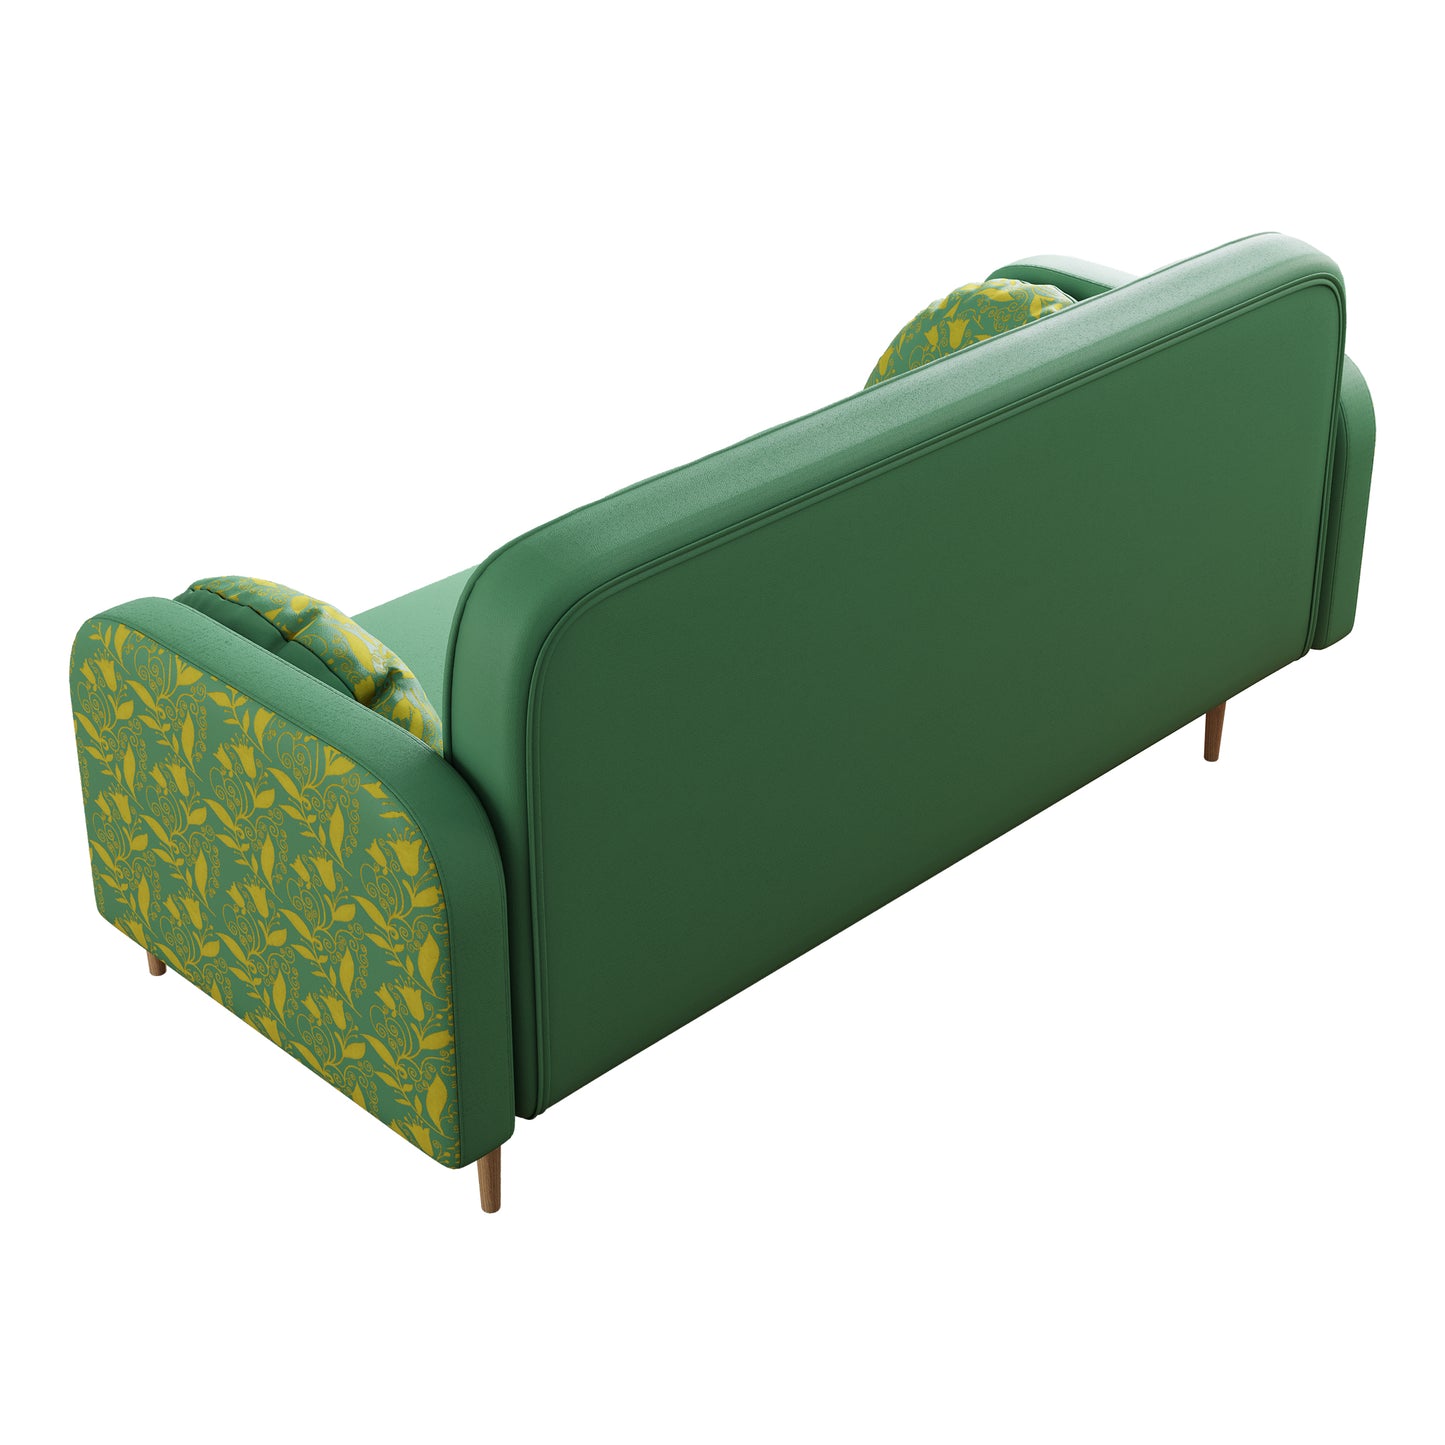 green Loveseat sofa with tulip pattern Modern Upholstered Two Seater PU Sofa with 2 dumpling-shaped throw pillows with tulip patterns